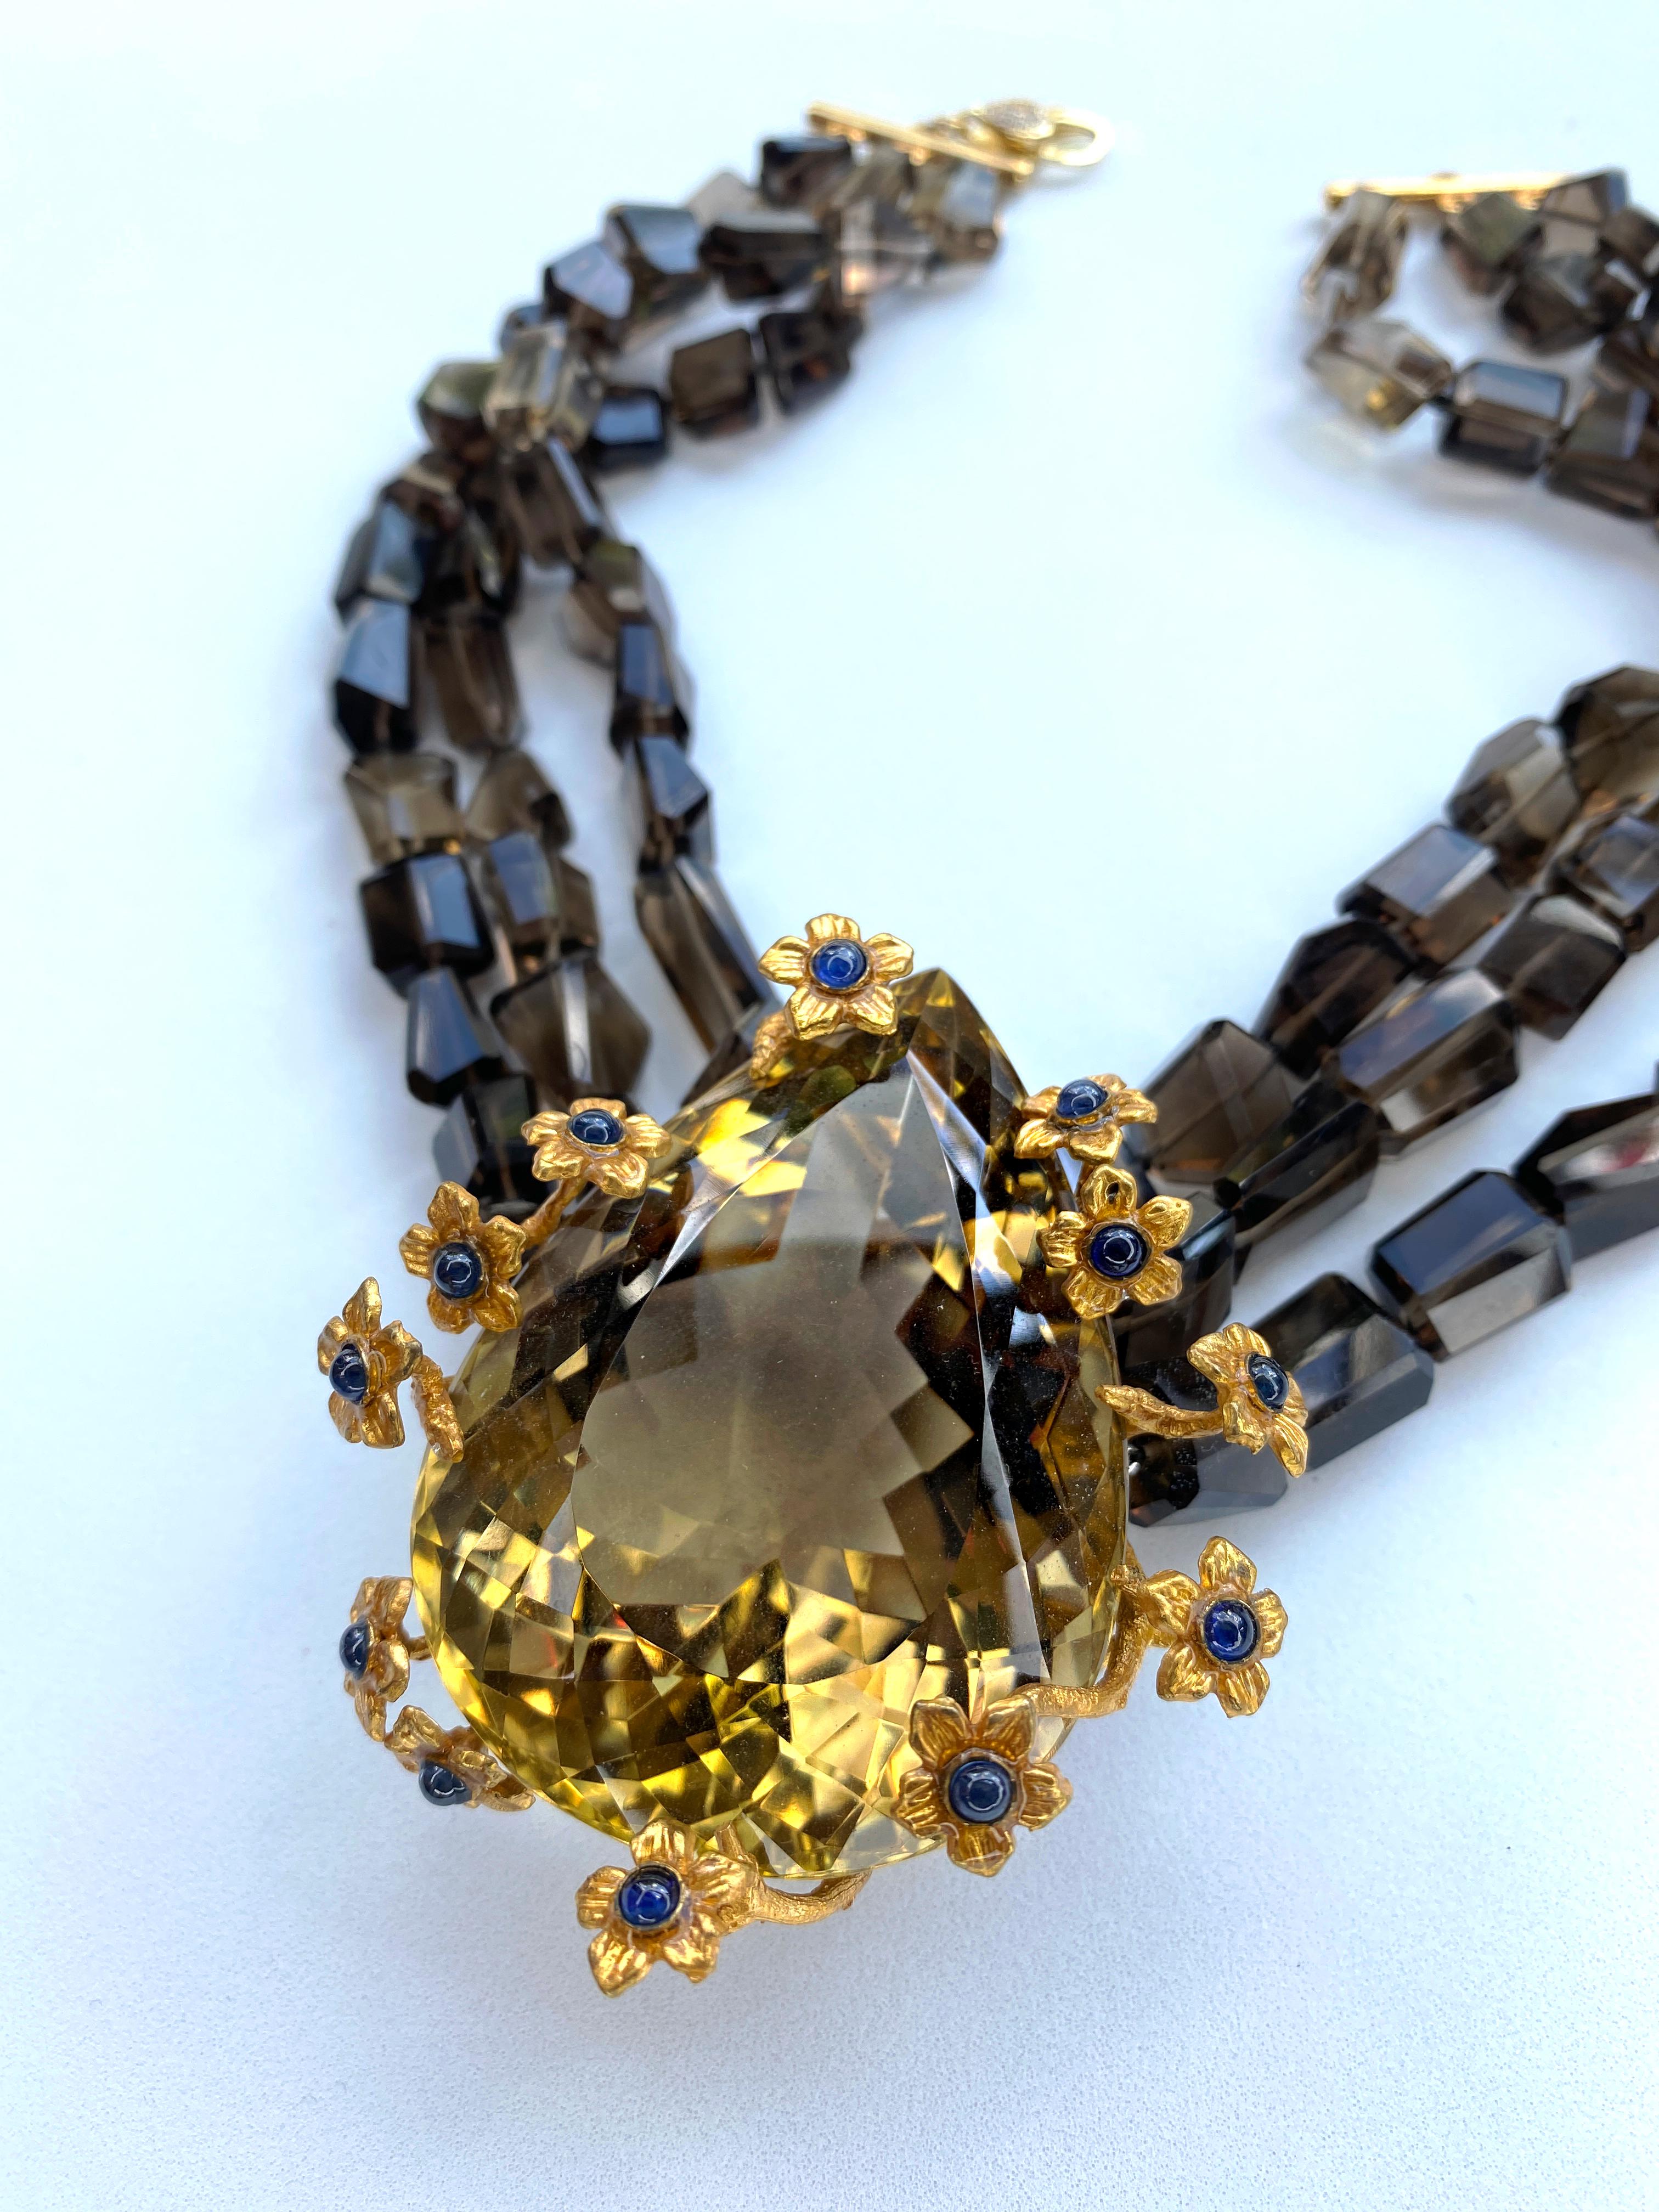 This glorious necklace features 3 strands of step cut Smoky Quartz beads and feature a Gold Filled vine wreath with blooming flowers, set with cabochon Sapphires delicately nesting an impressive natural 534 Ct Citrine from southern Spain. This